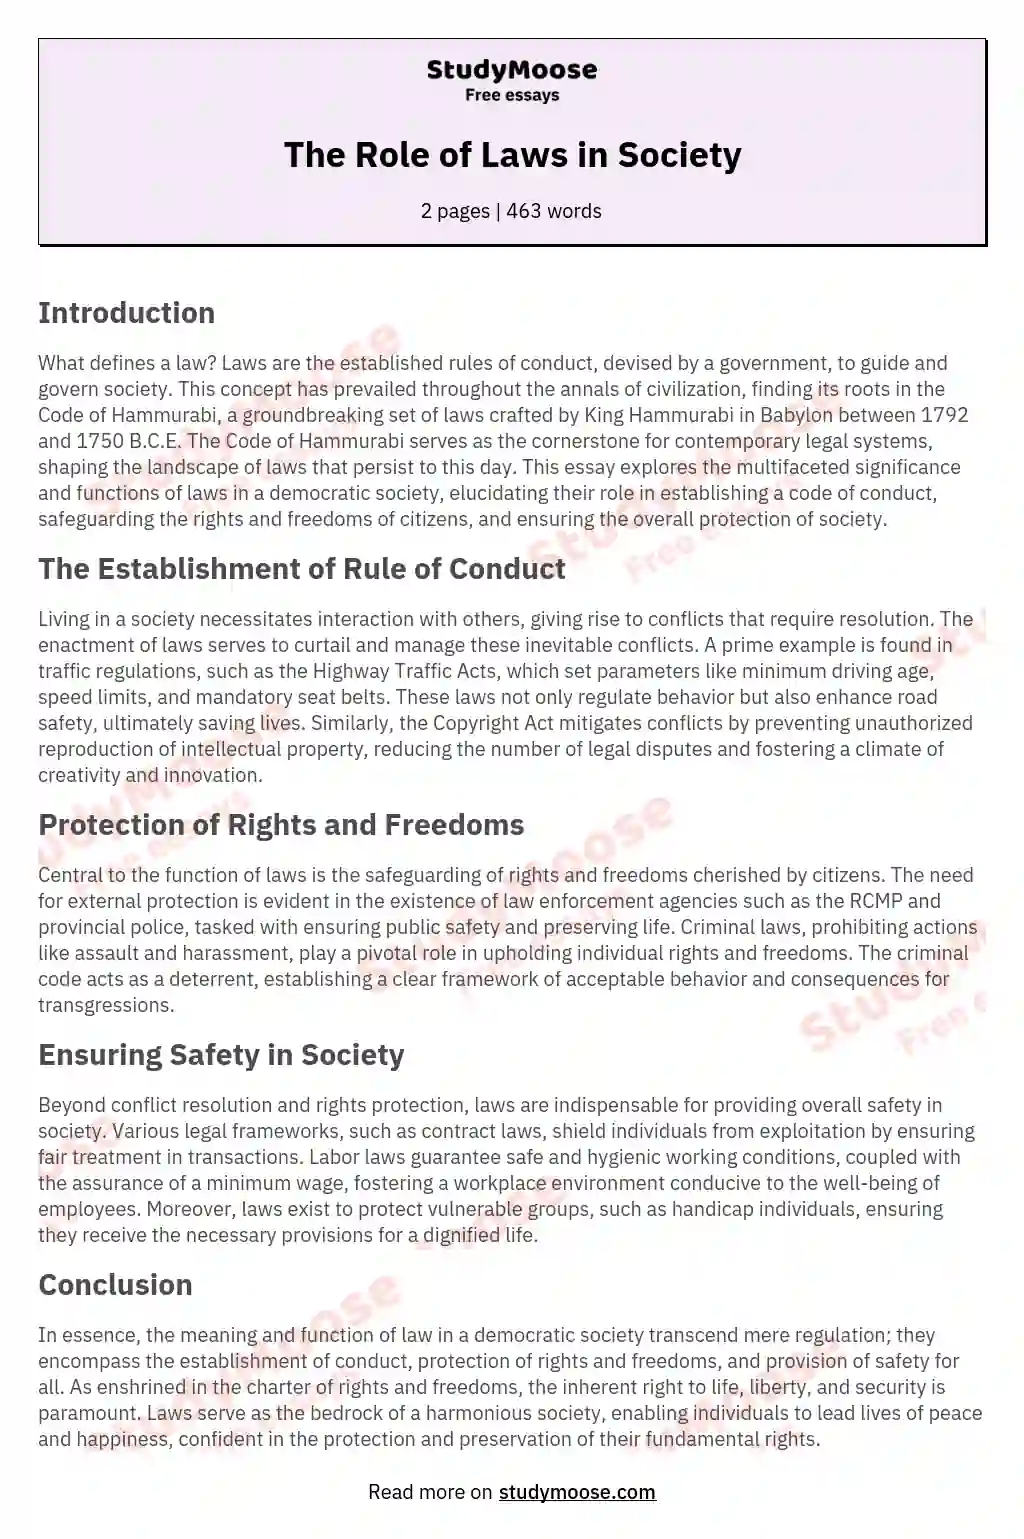 The Role of Laws in Society essay